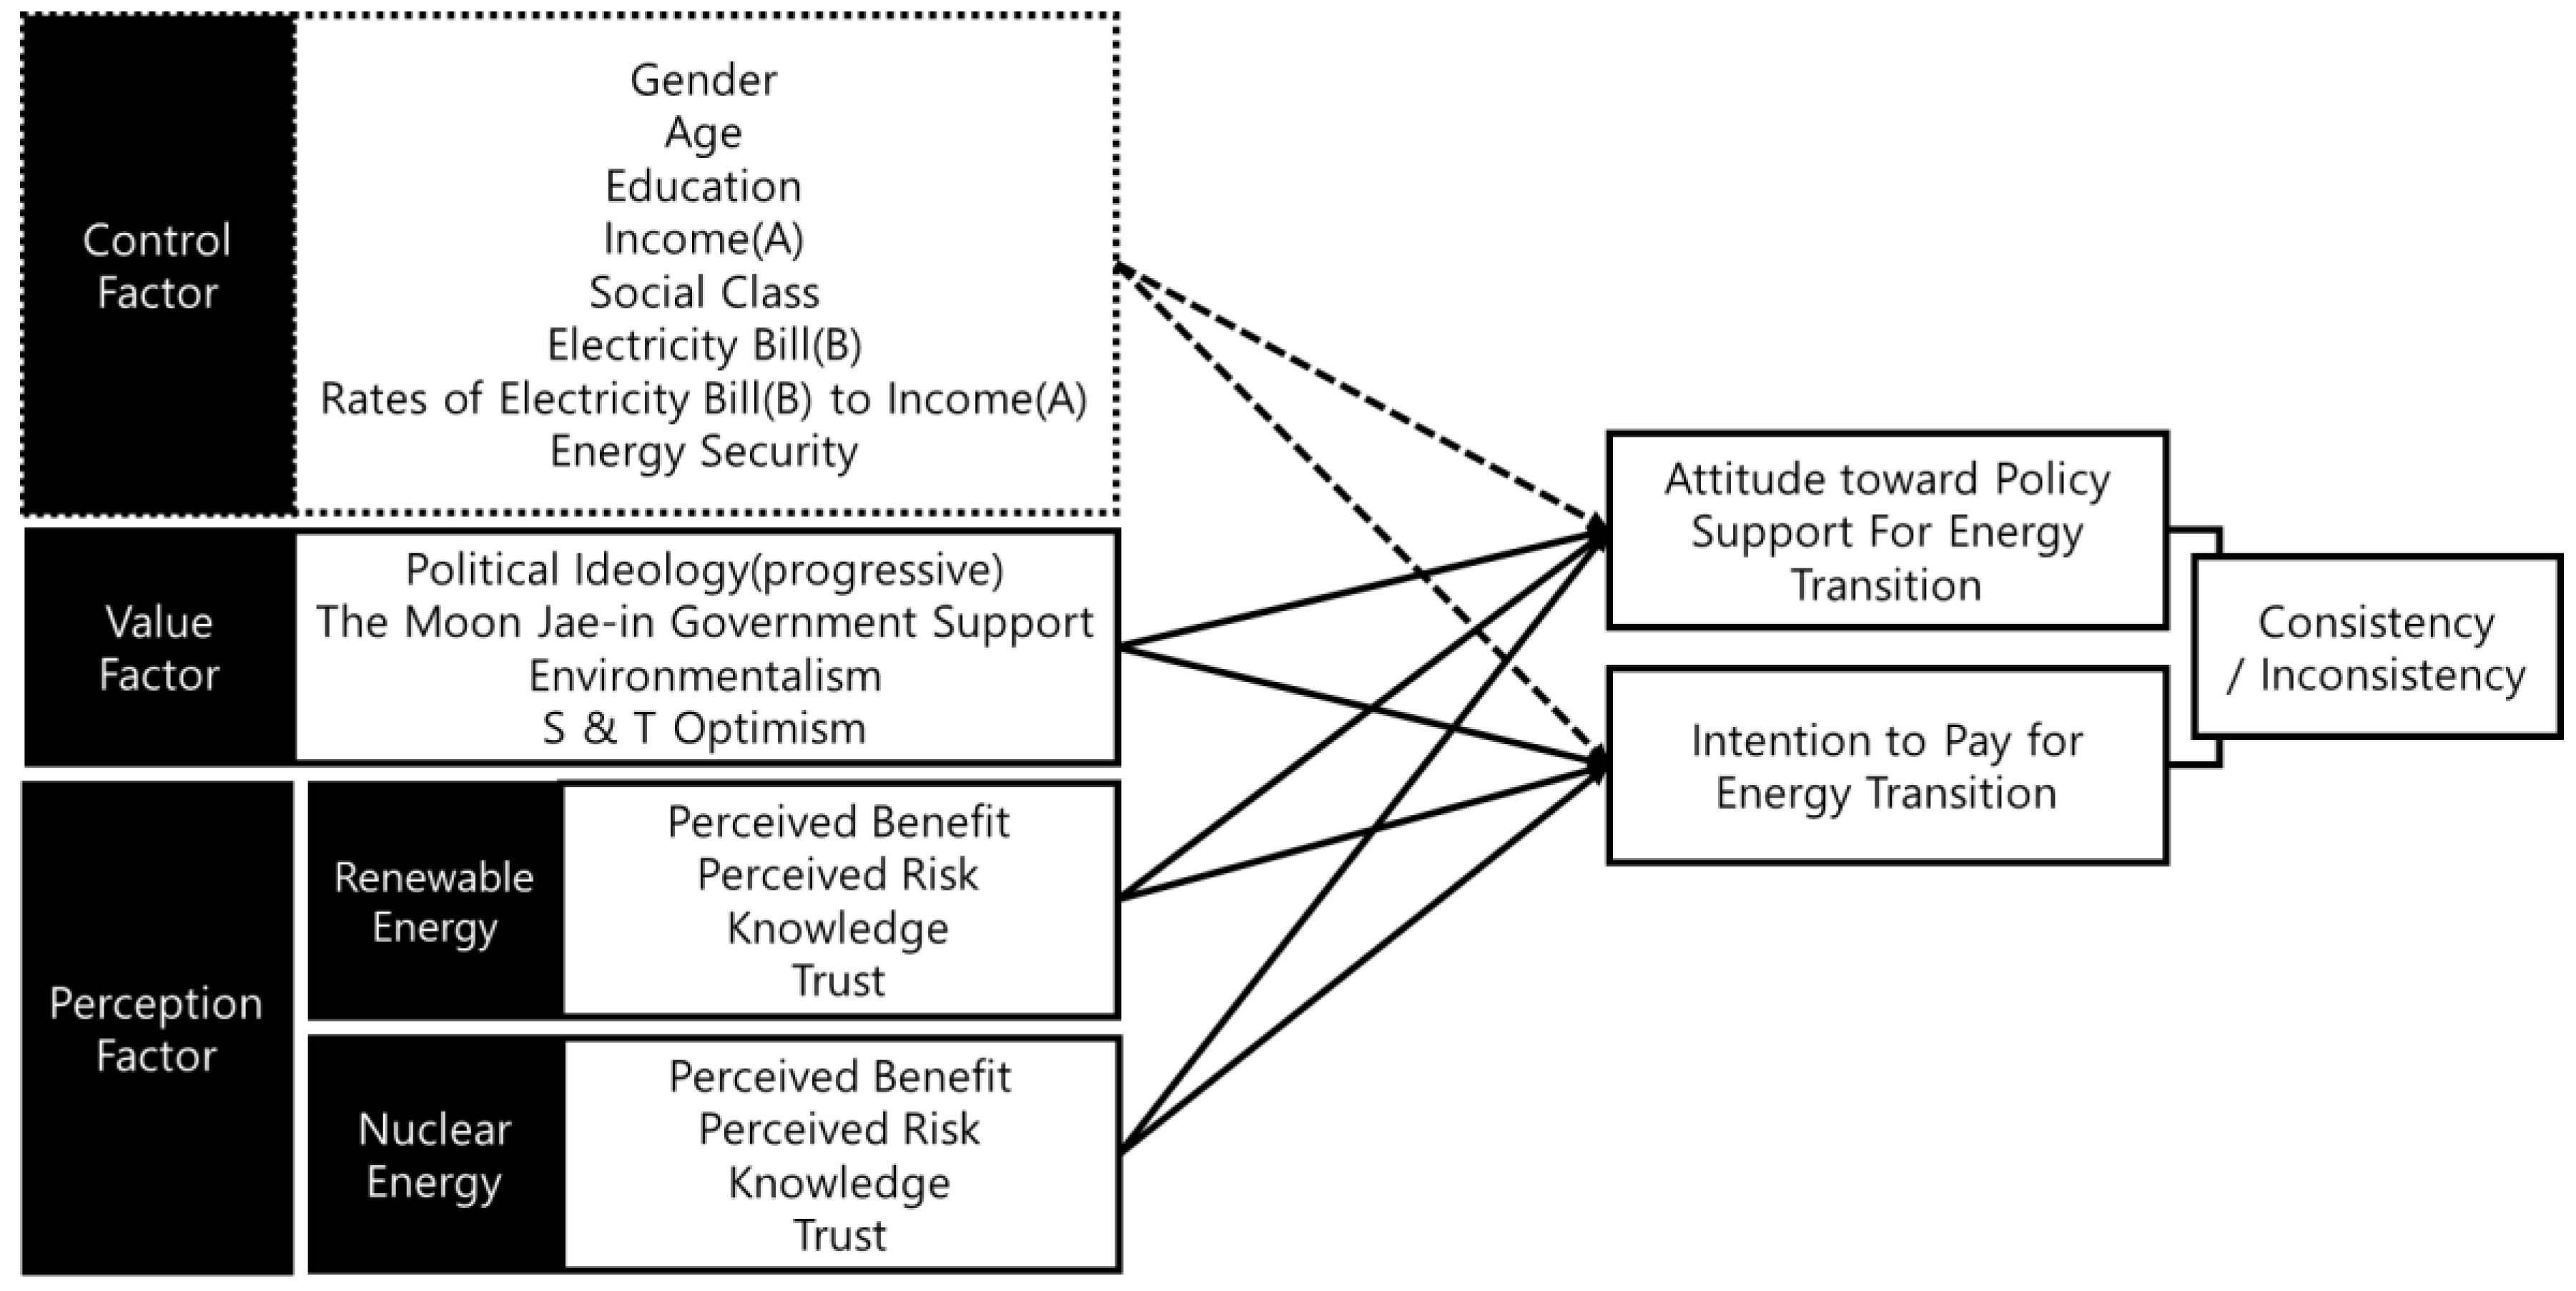 IJERPH | Free Full-Text | Searching for New Human Behavior Model in  Explaining Energy Transition: Exploring the Impact of Value and Perception  Factors on Inconsistency of Attitude toward Policy Support and Intention